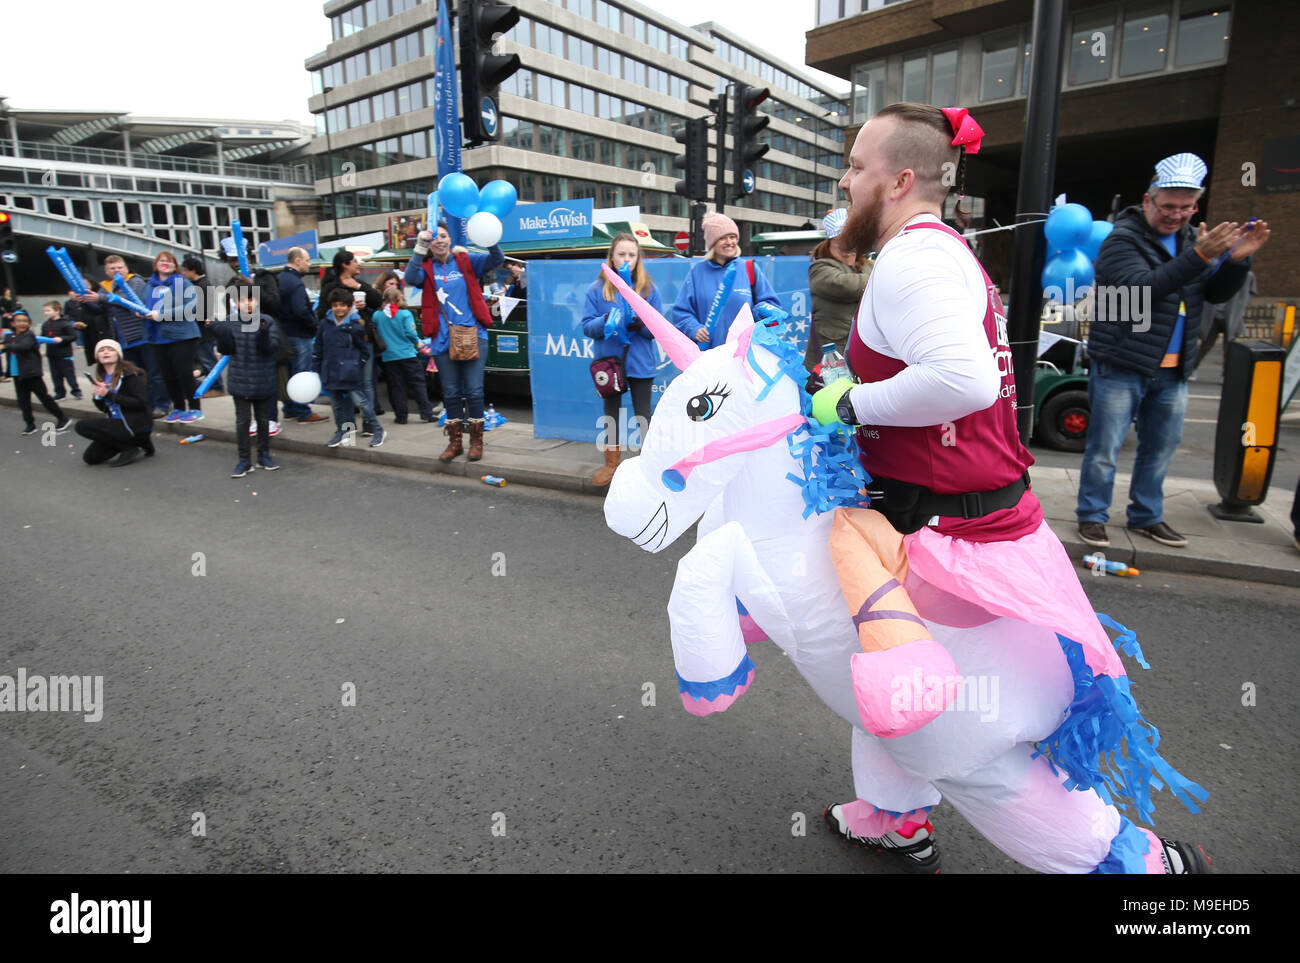 A runner in fancy dress during the 2018 London Landmarks Half Marathon. PRESS ASSOCIATION Photo. Picture date: Sunday March 25, 2018. Photo credit should read: Steven Paston/PA Wire Stock Photo